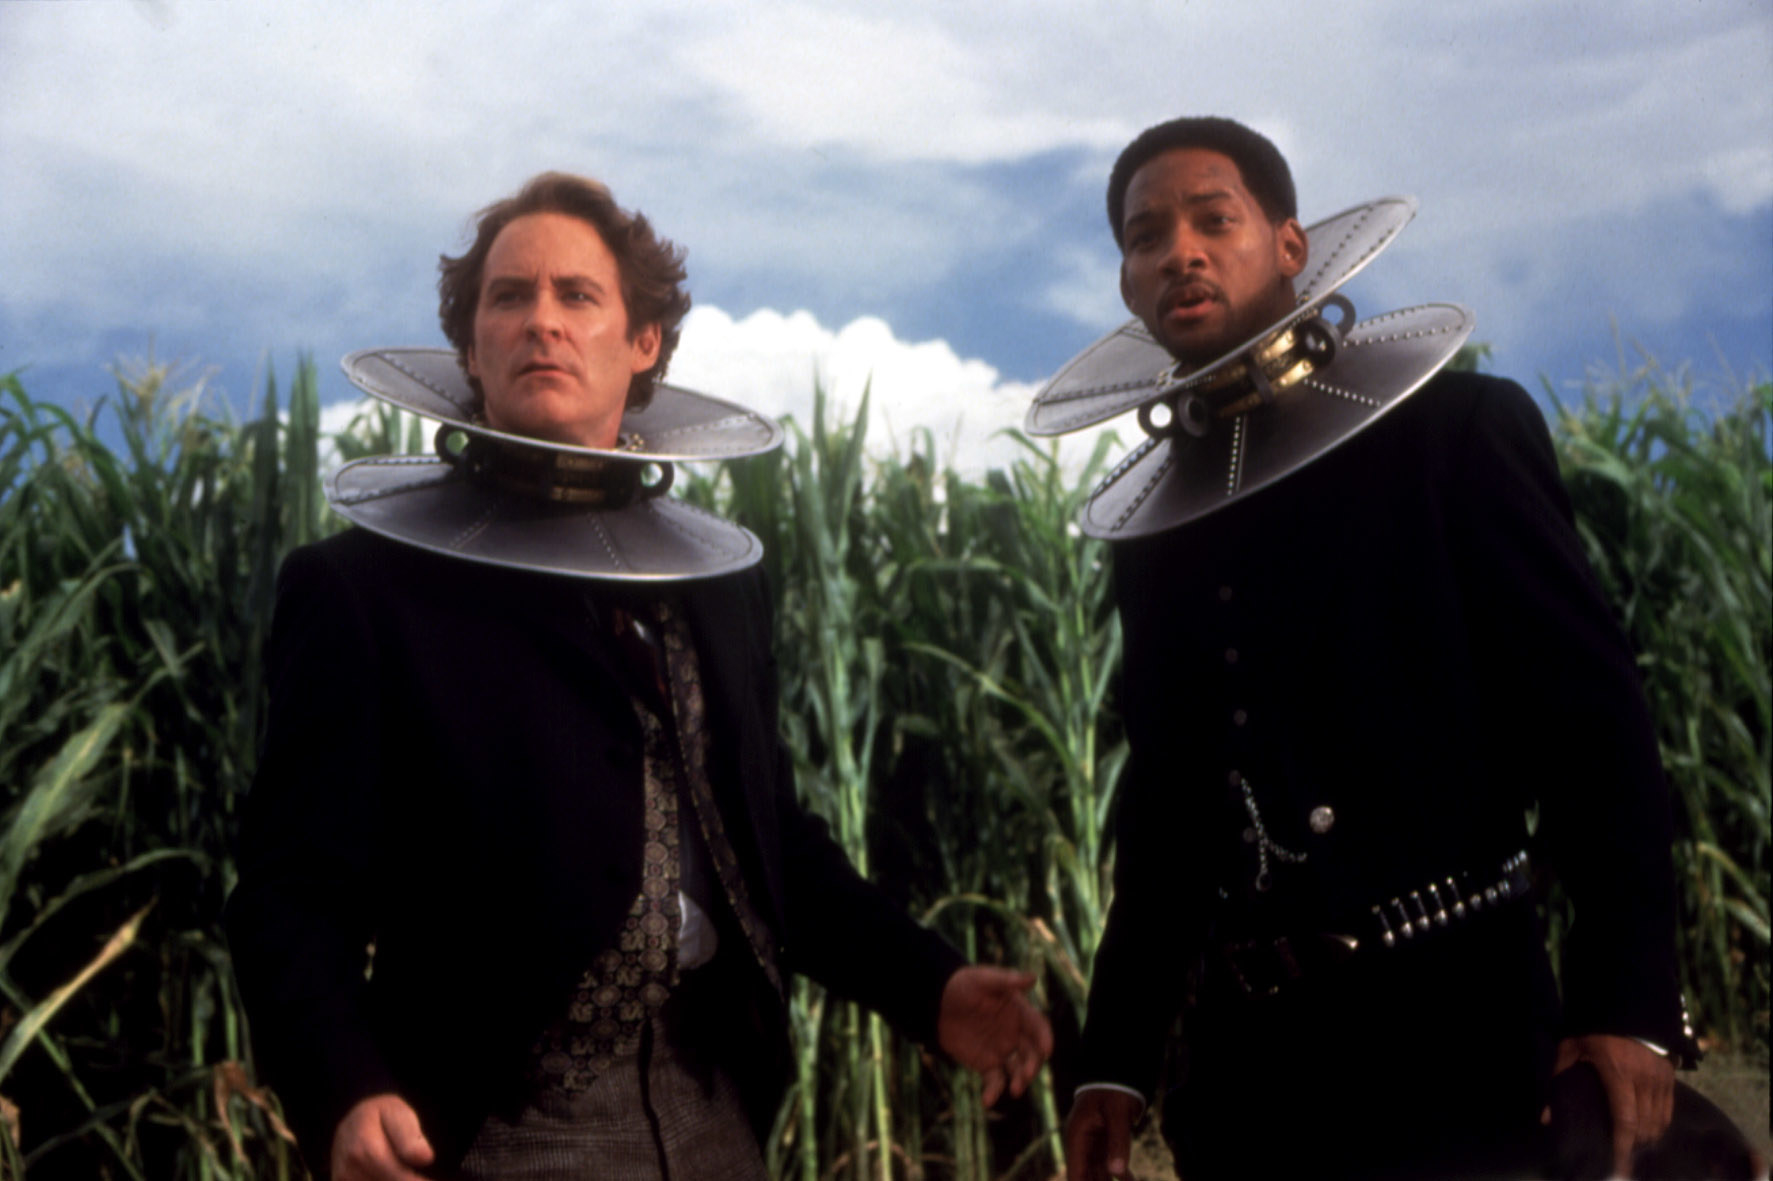 Smith and Kevin Kline wearing metal collars in a scene from Wild Wild West